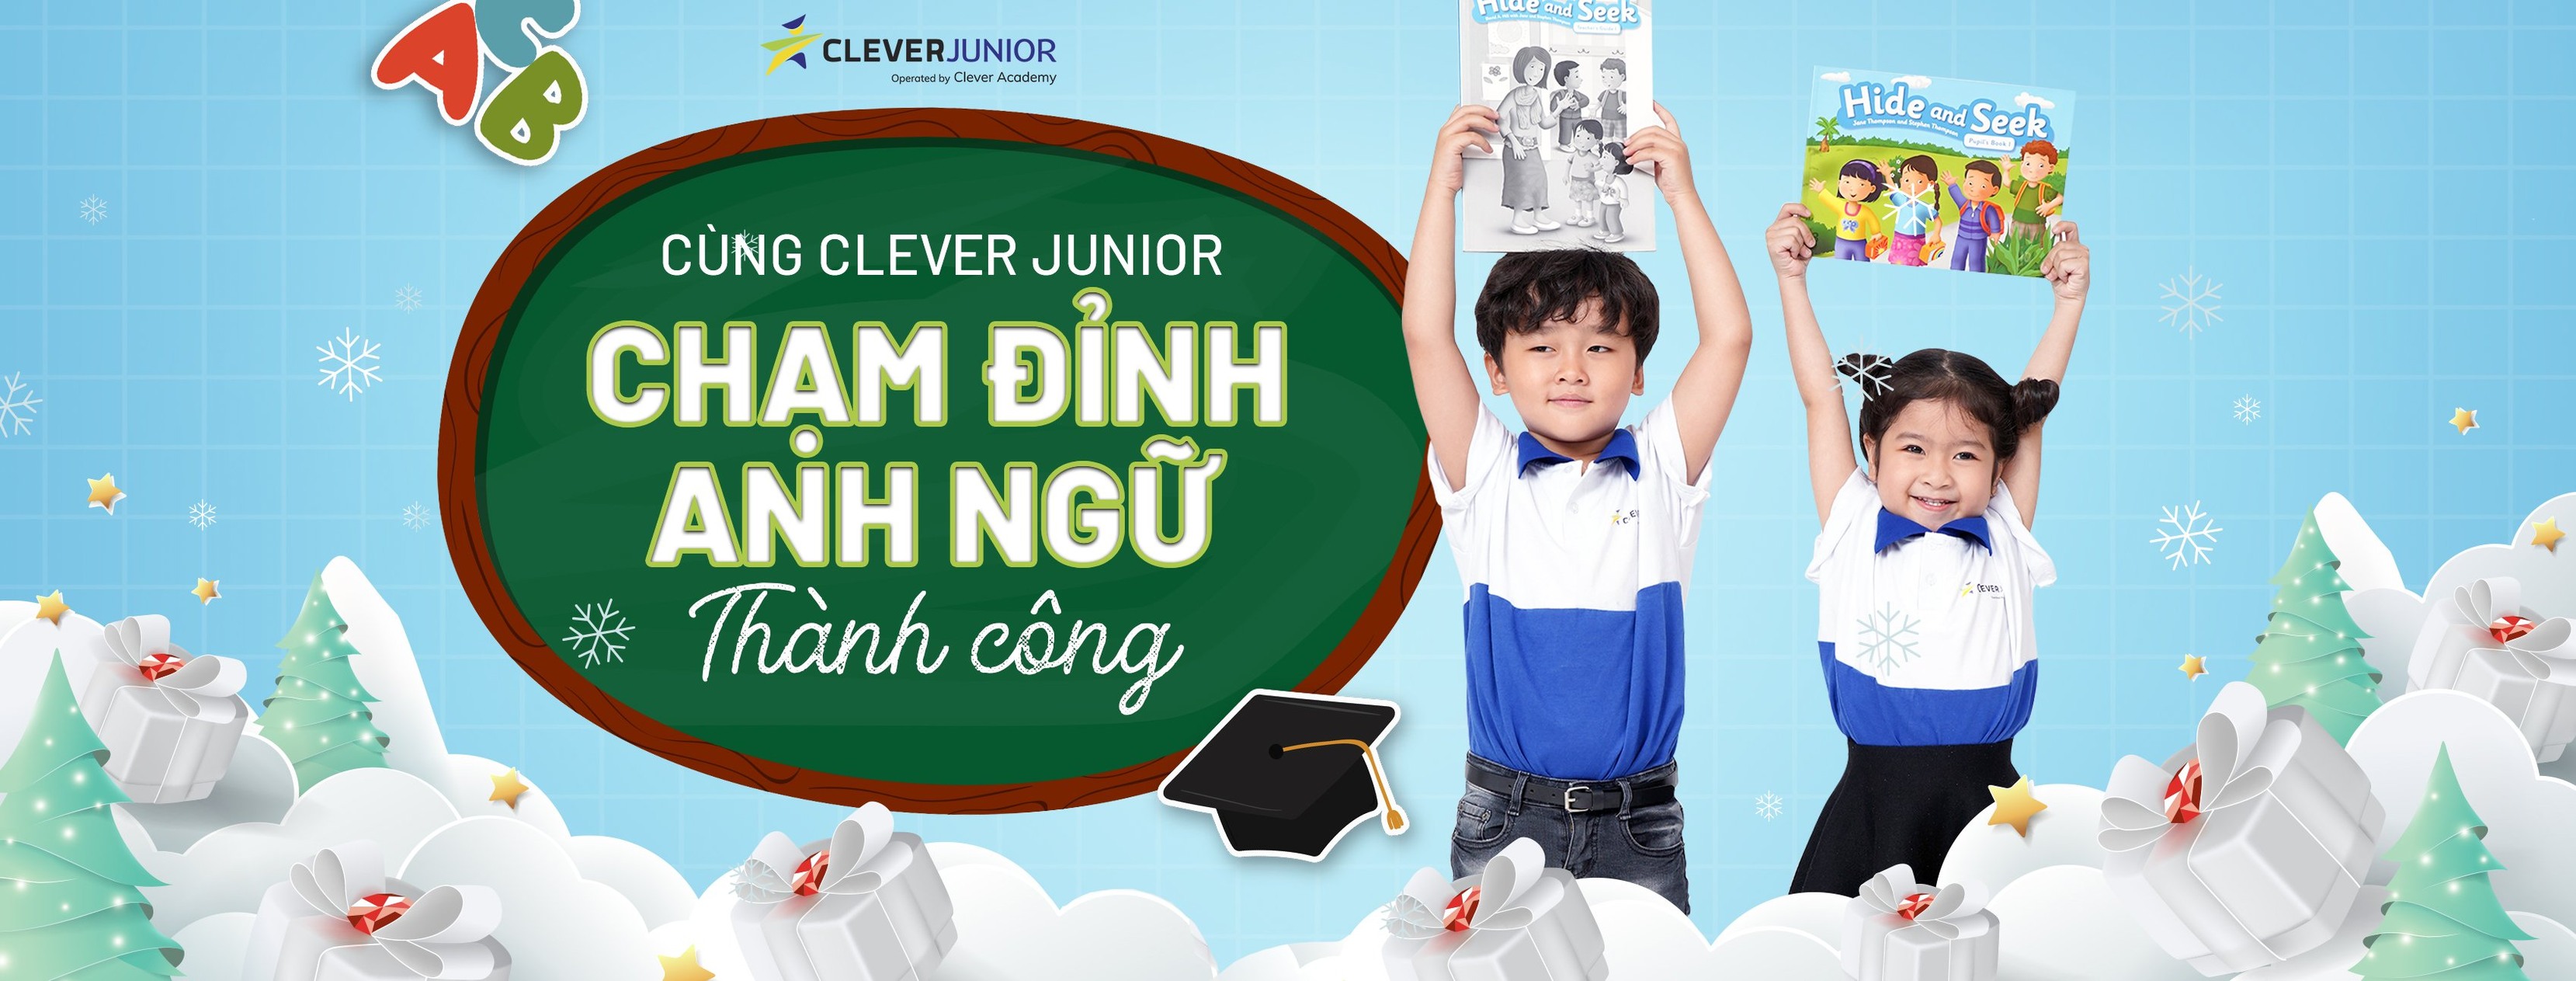 Anh ngữ Clever Junior ảnh 2